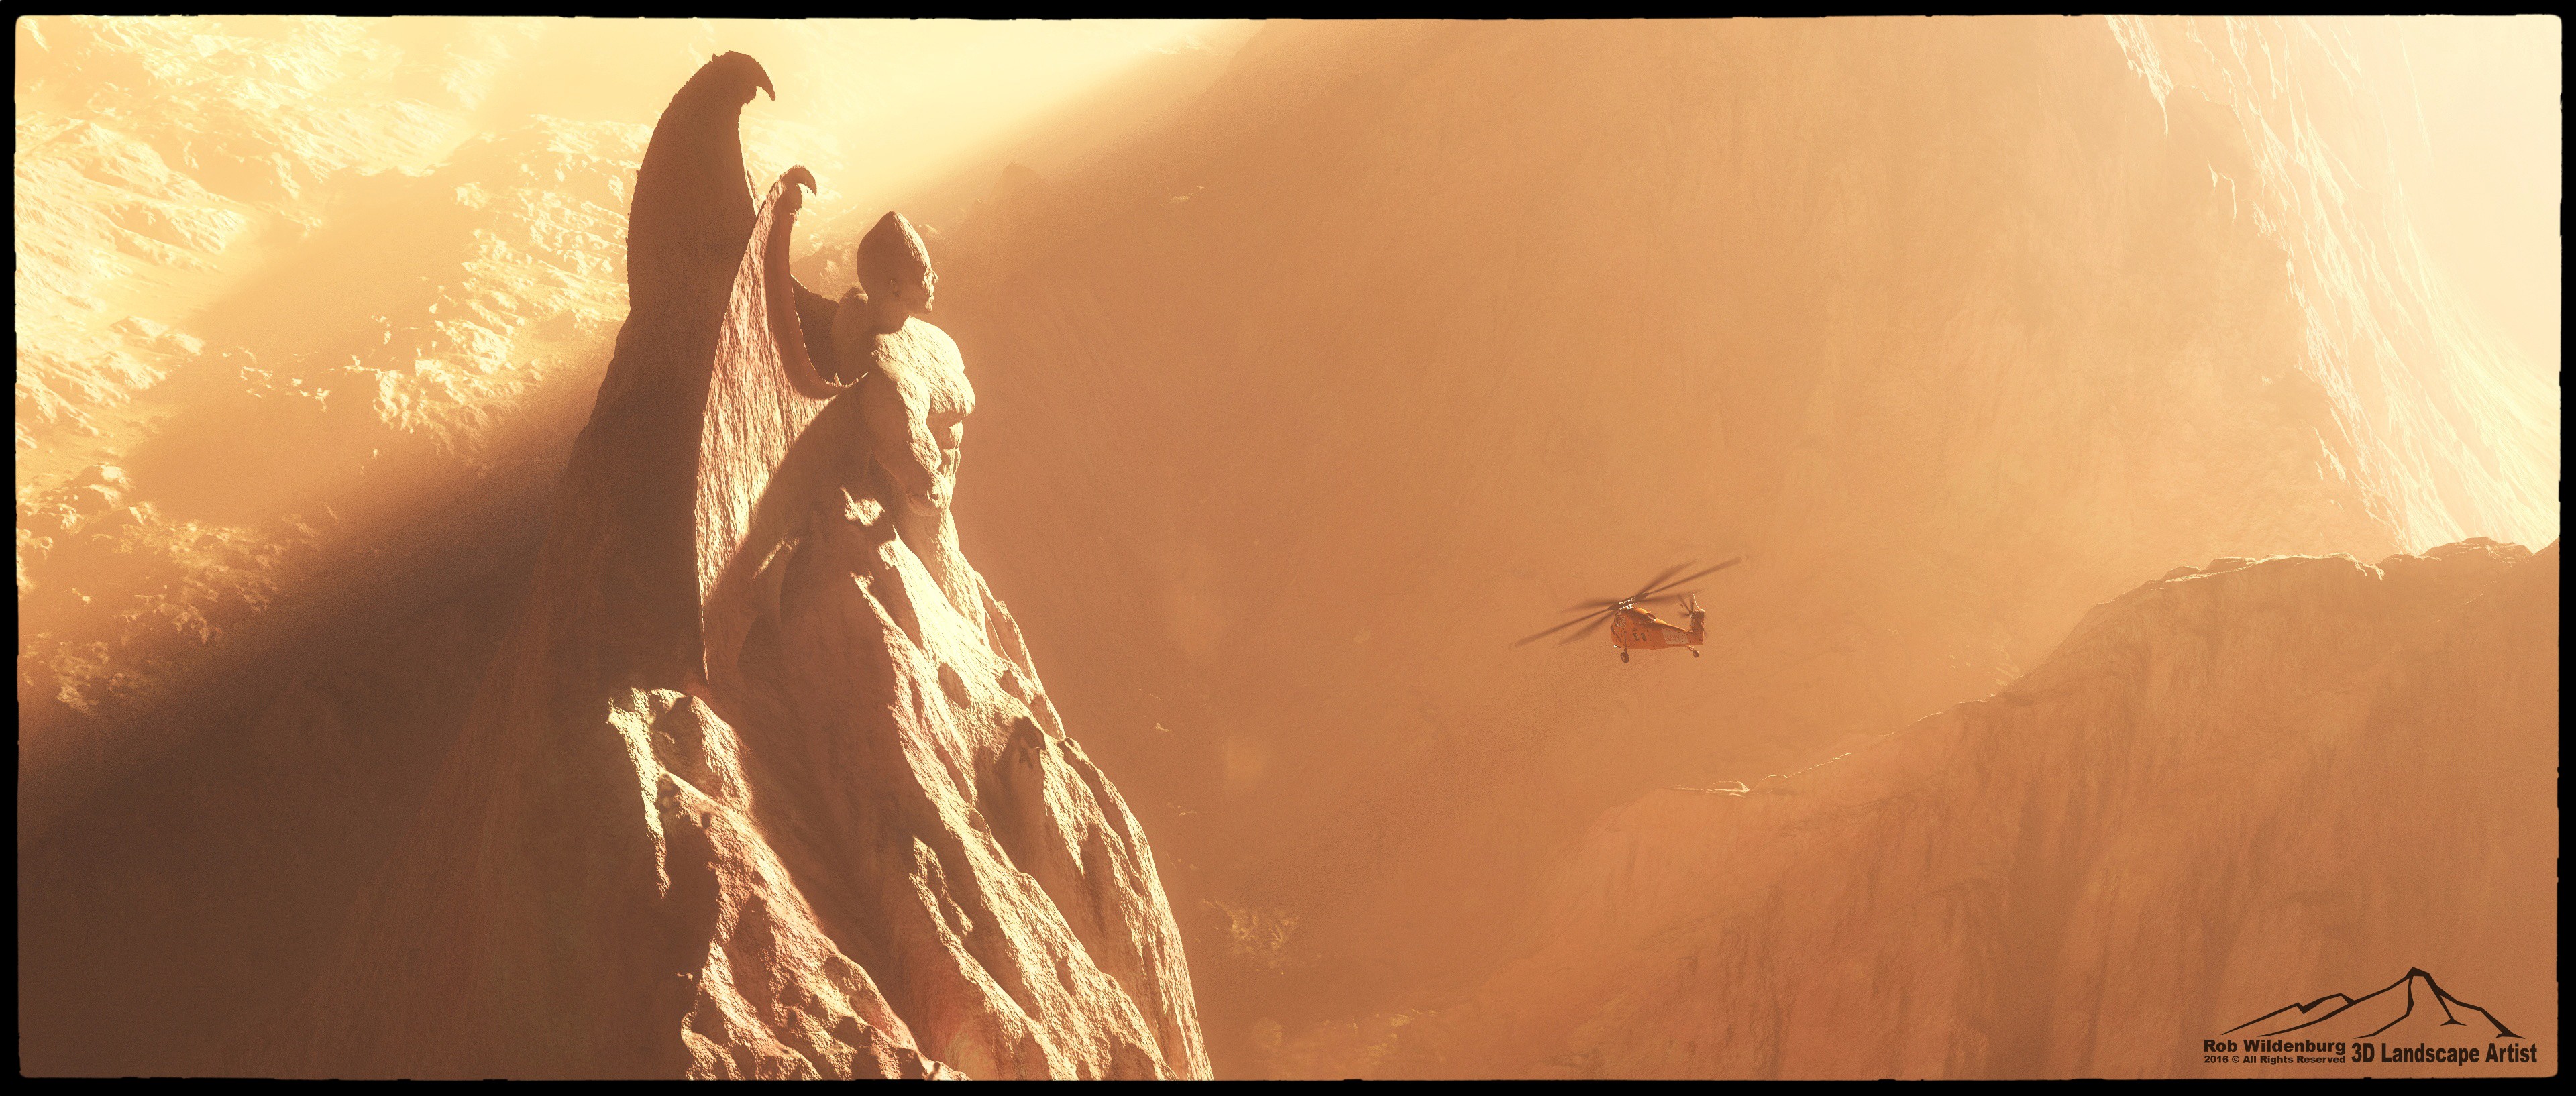 General 3840x1634 landscape mountains statue helicopters vehicle digital art DeviantArt aircraft